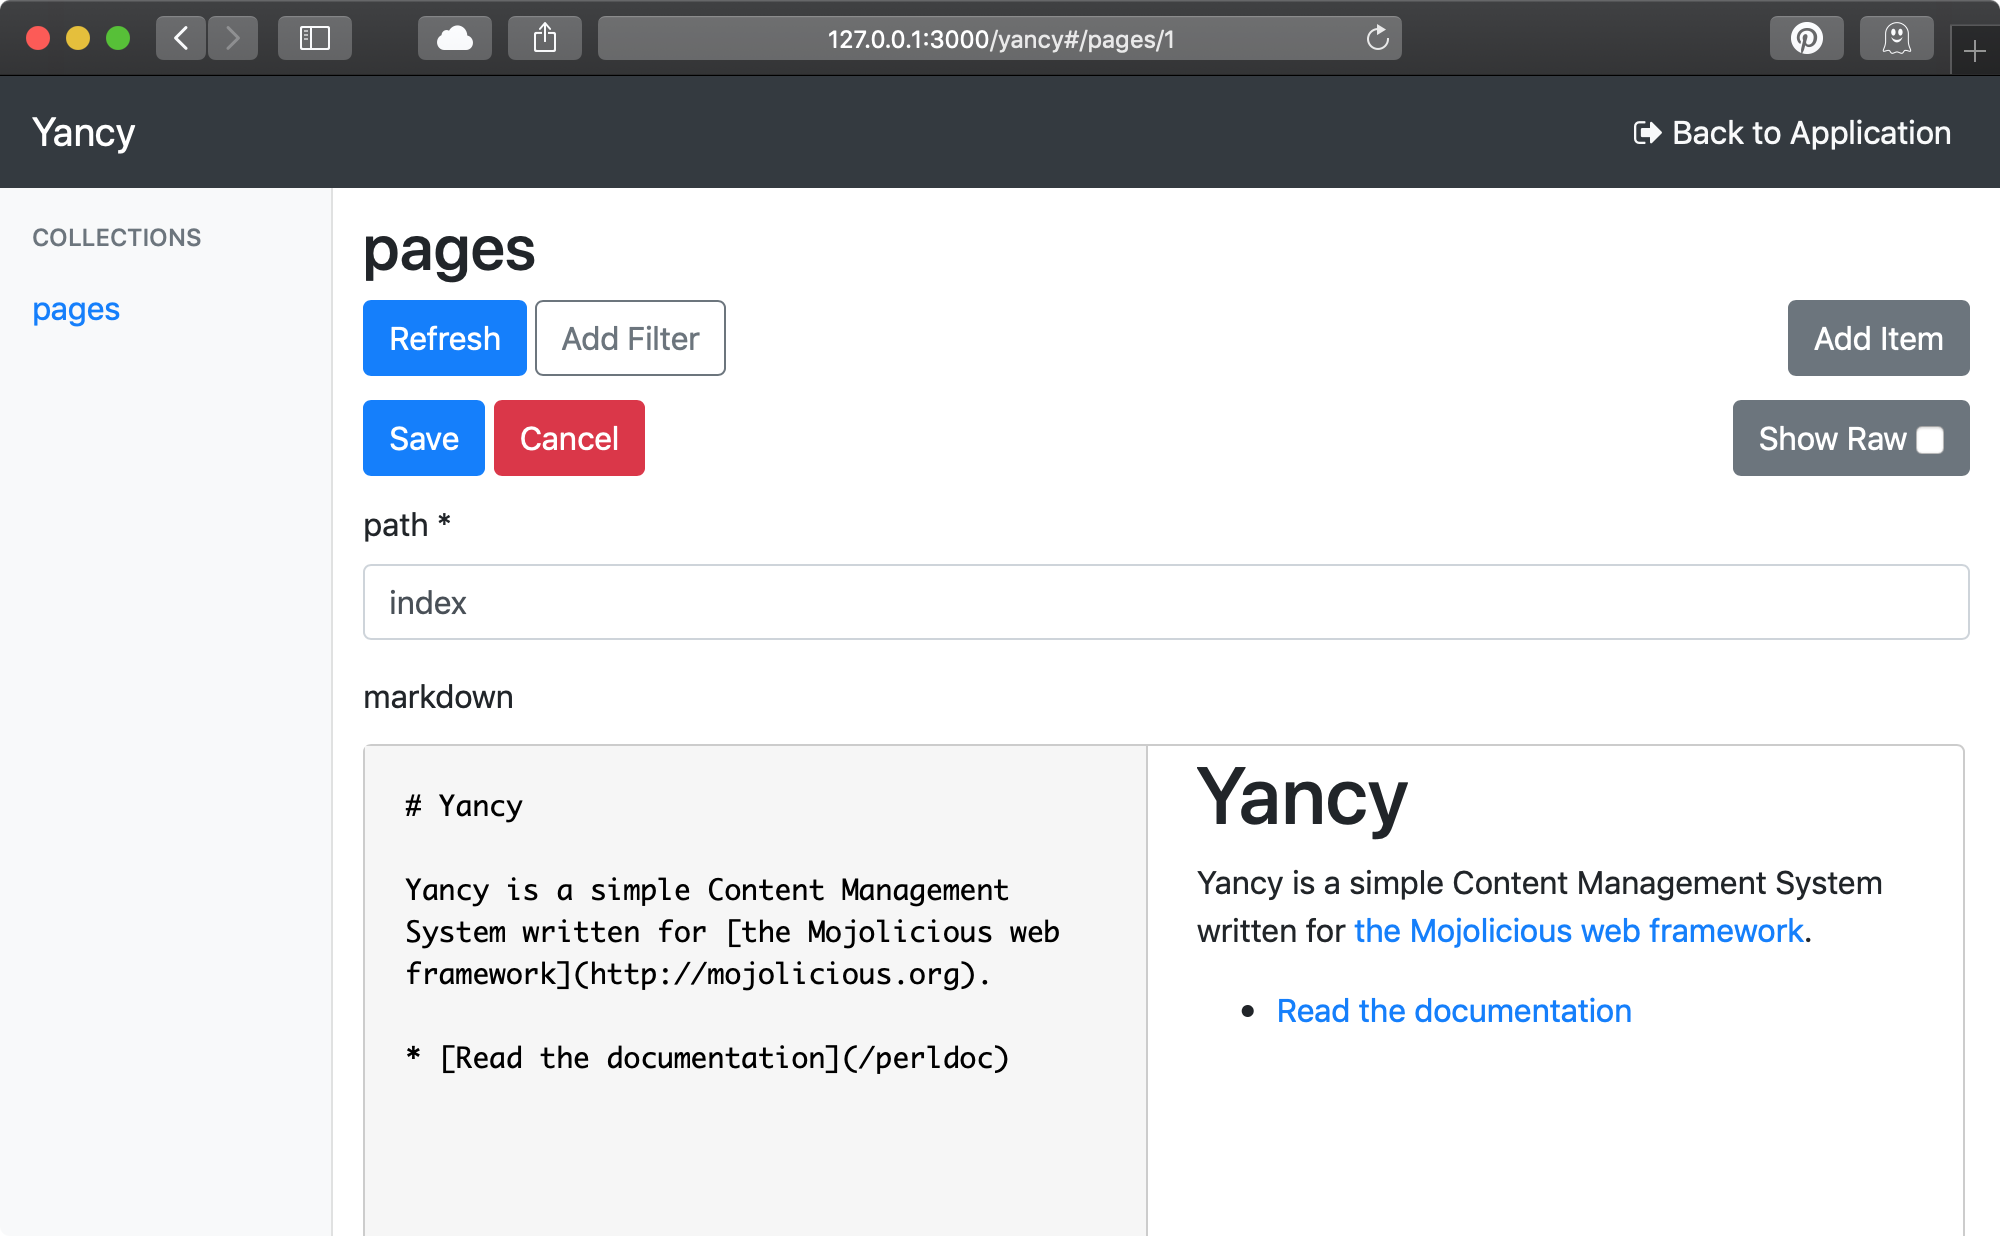 Screenshot showing the Yancy editor adding an "index"
page